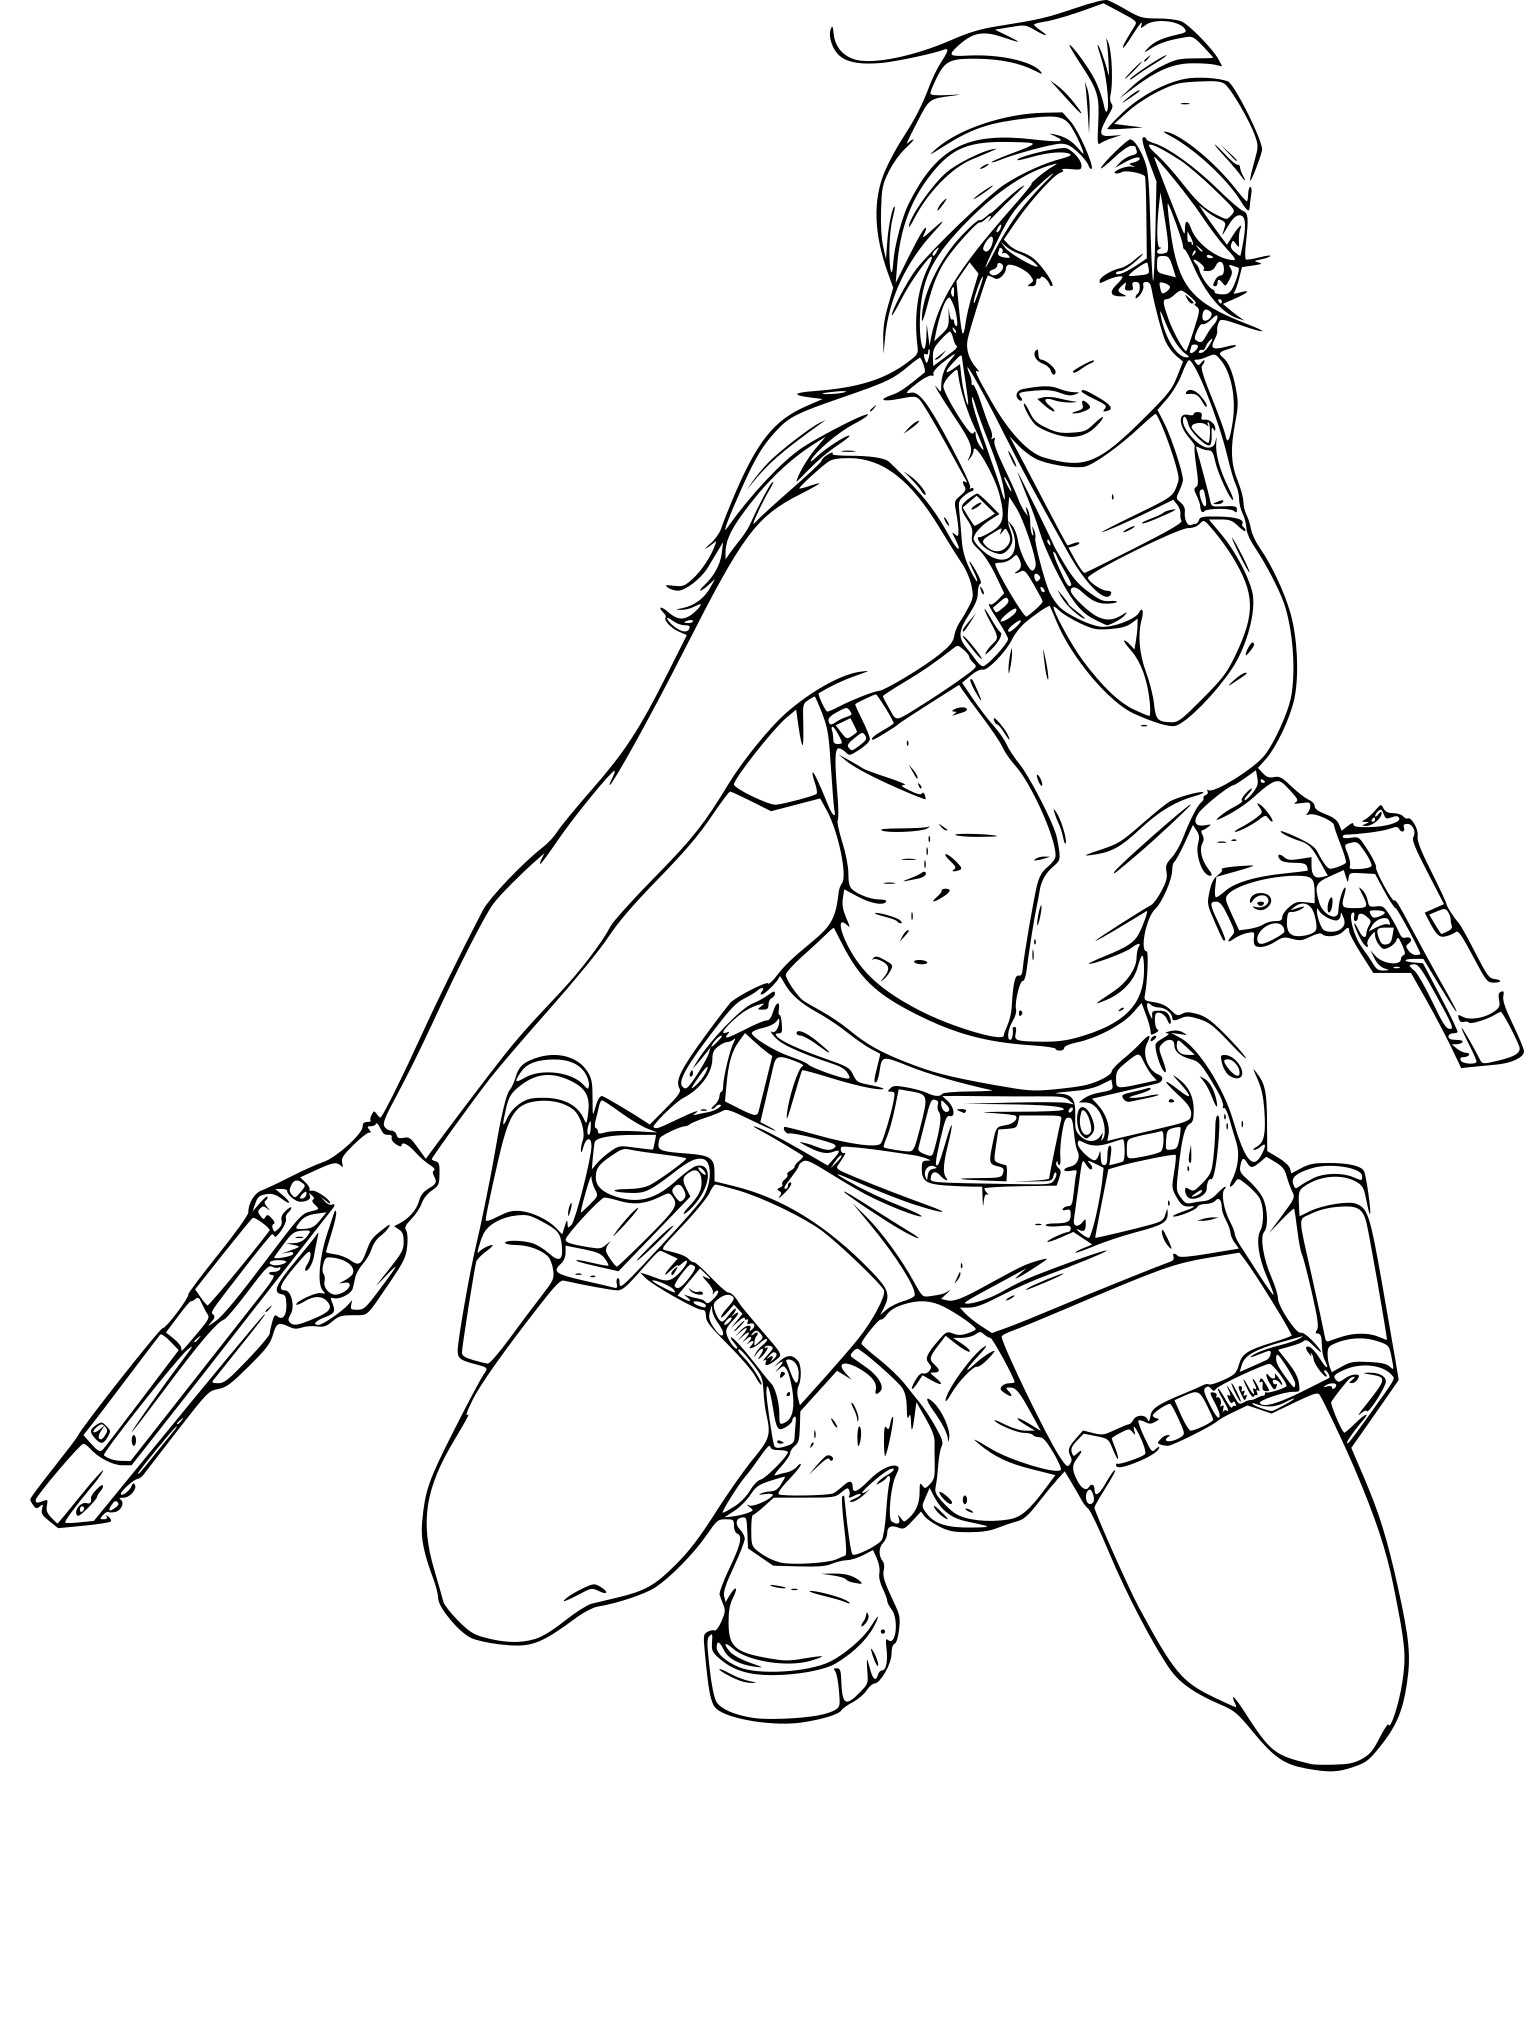 Tomb Raider coloring page - free printable coloring pages on coloori.com